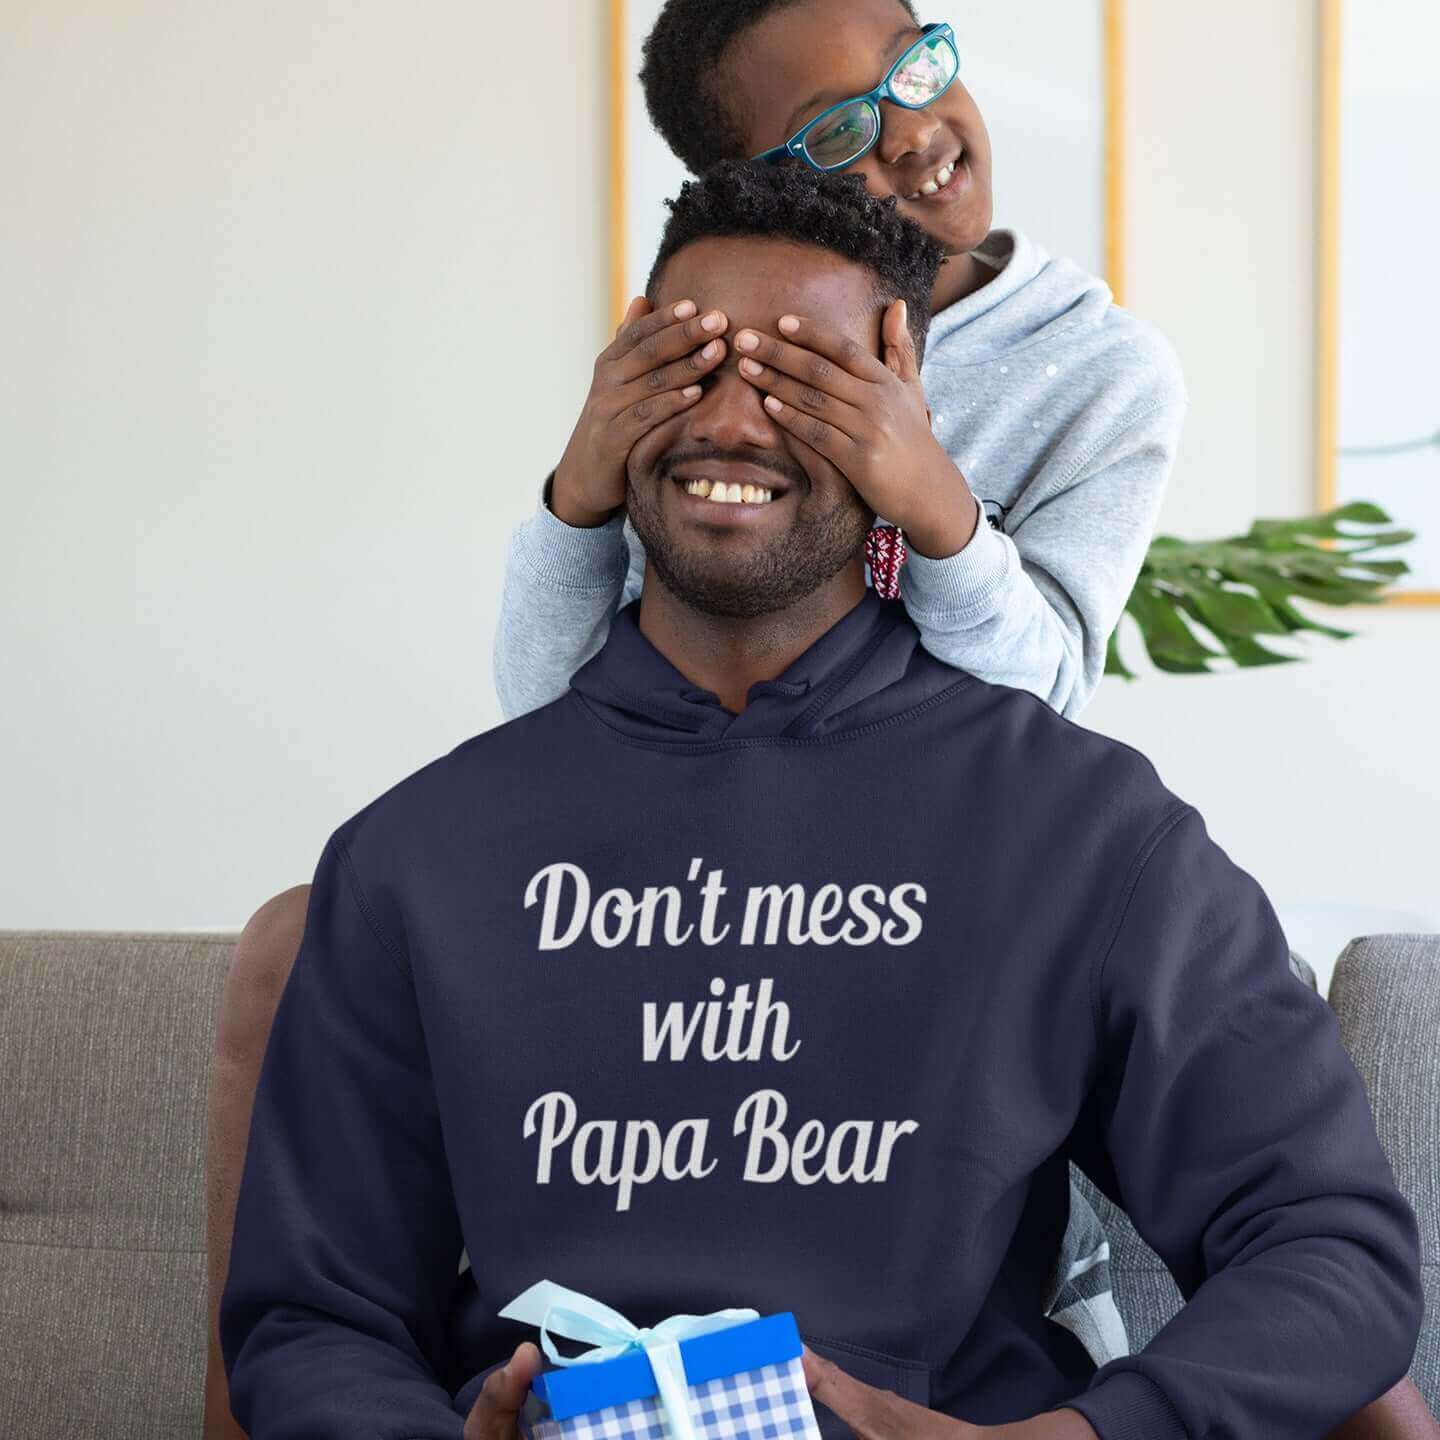 Man playing with his son wearing a Navy blue hoodie sweatshirt with the phrase Don't mess with Papa Bear printed on the front.